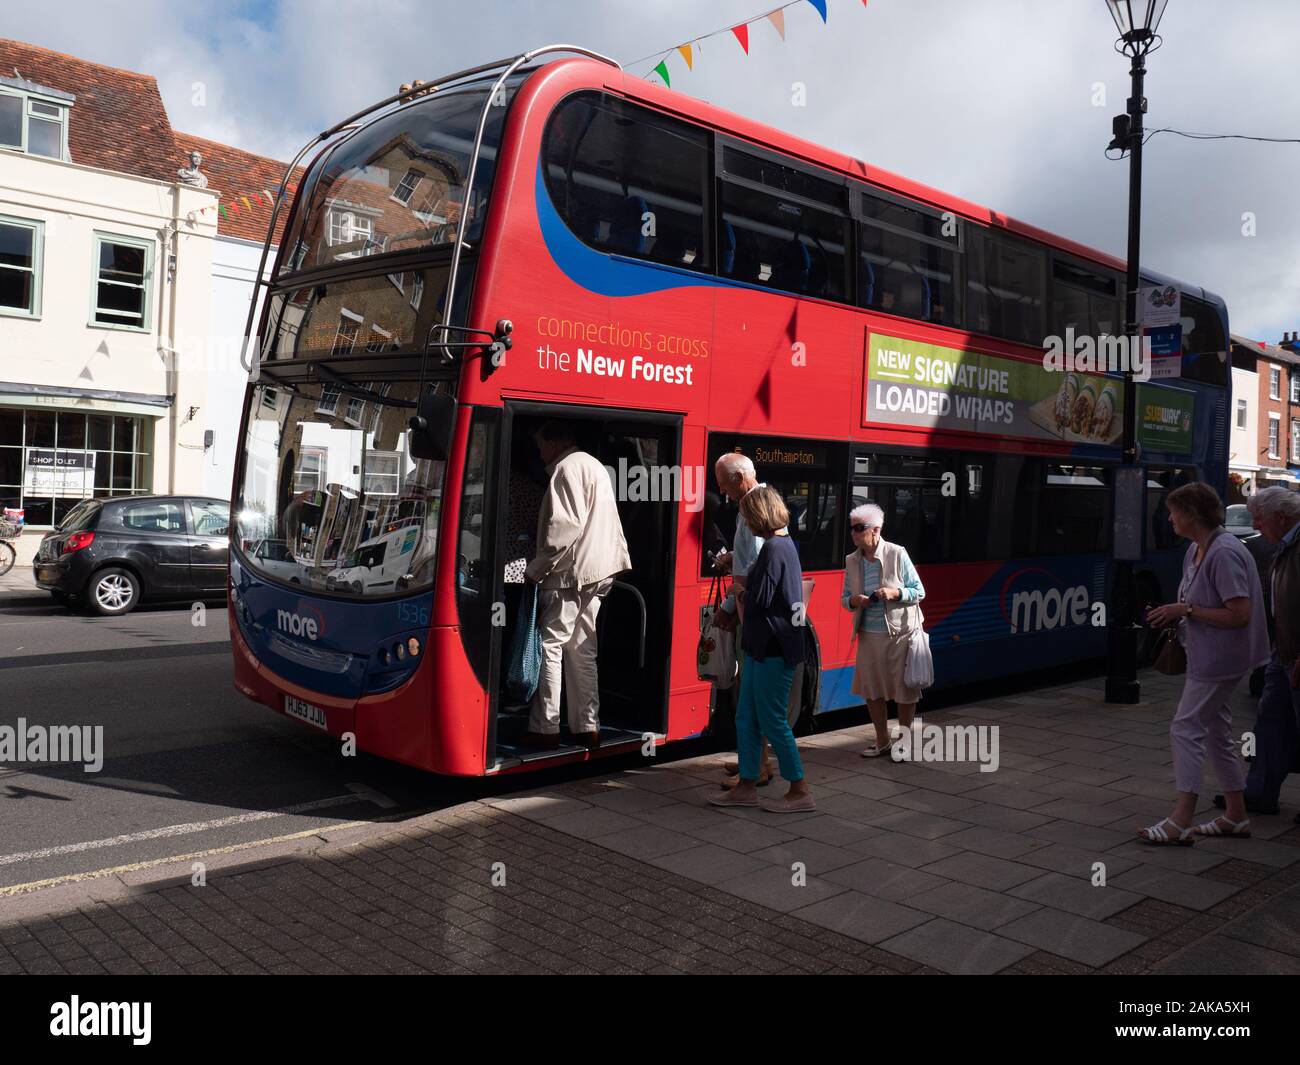 A Alexander Dennis Enviro 400 bus operated by Go South Coast, loads passengers in Lymington Stock Photo